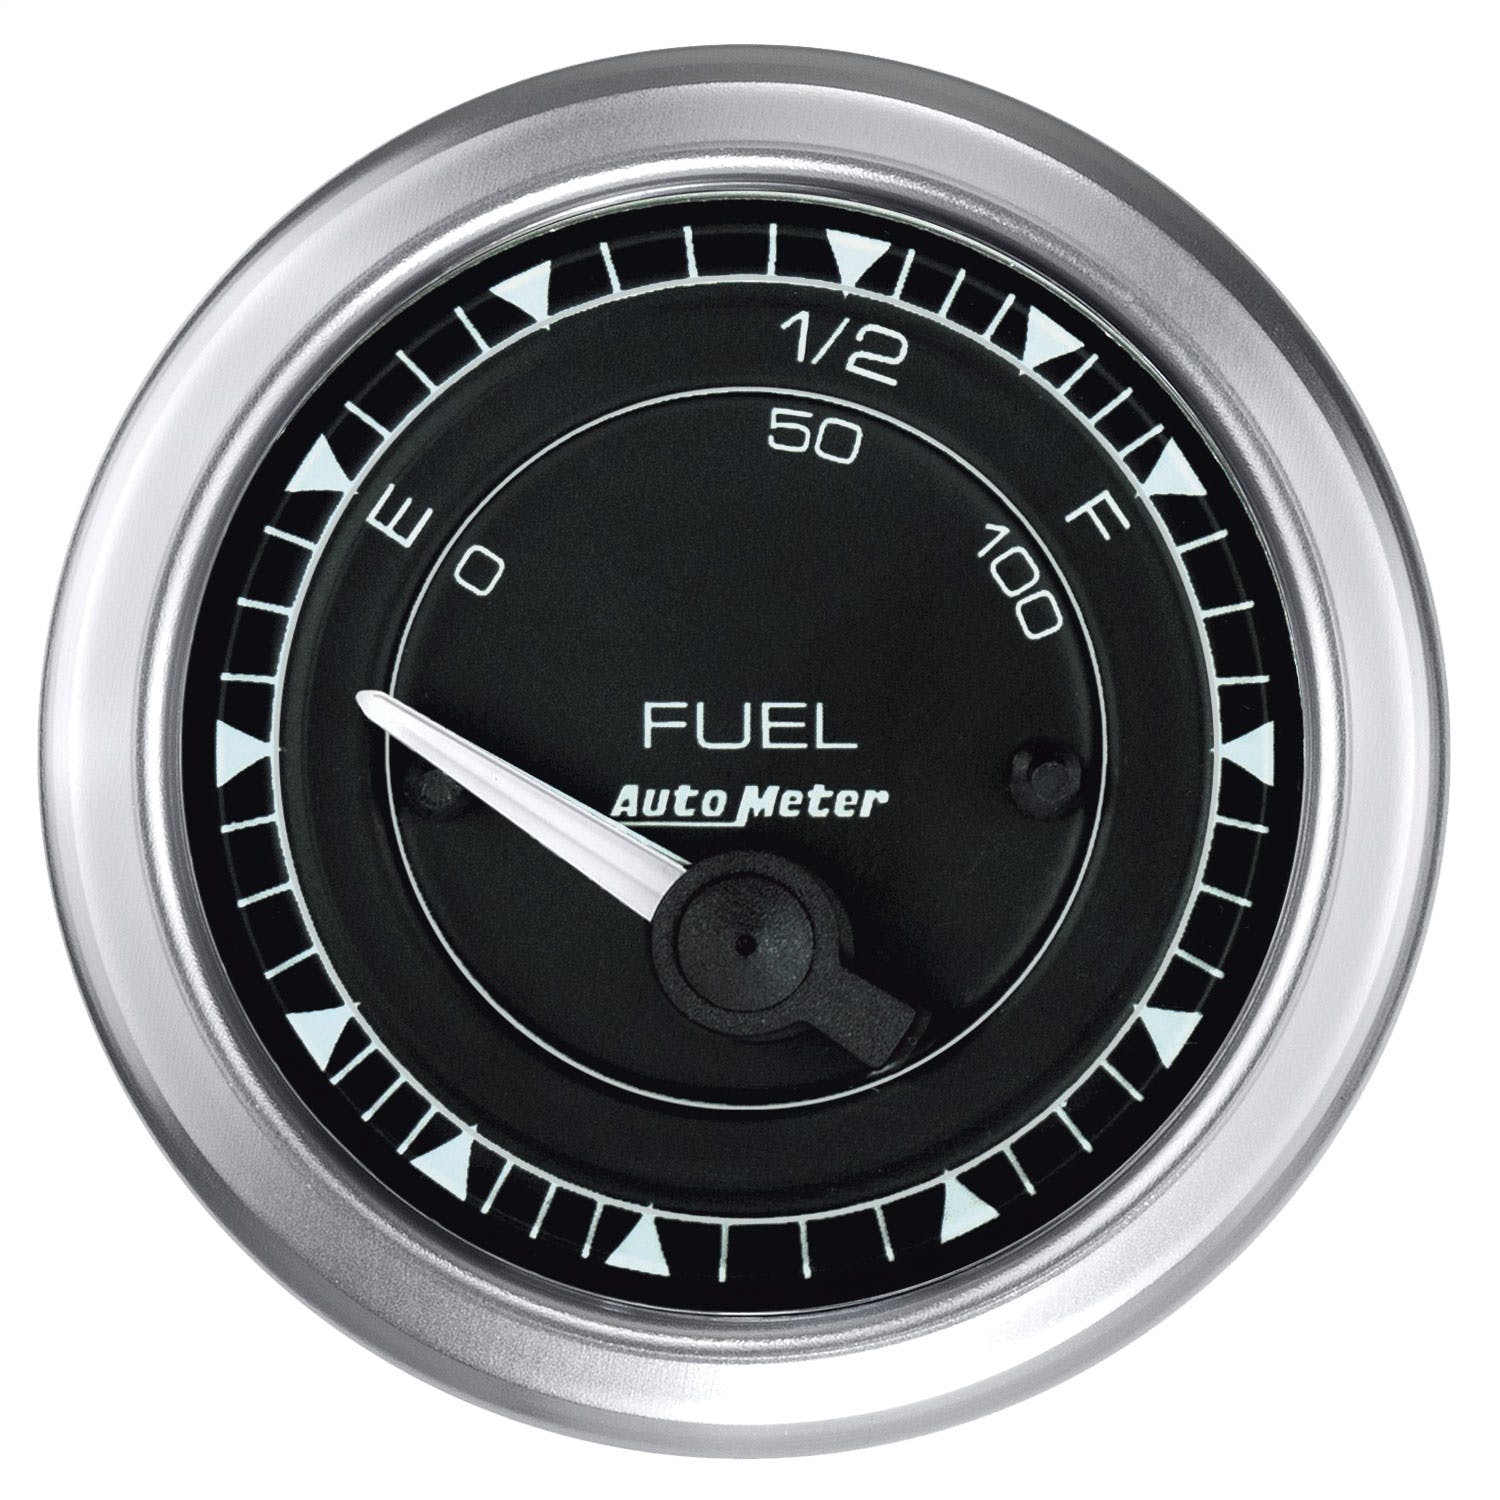 AutoMeter Products 8115 Fuel Level Gauge, 2 1/16, 73 ohm E TO 10 ohm F, Electric, Chrono